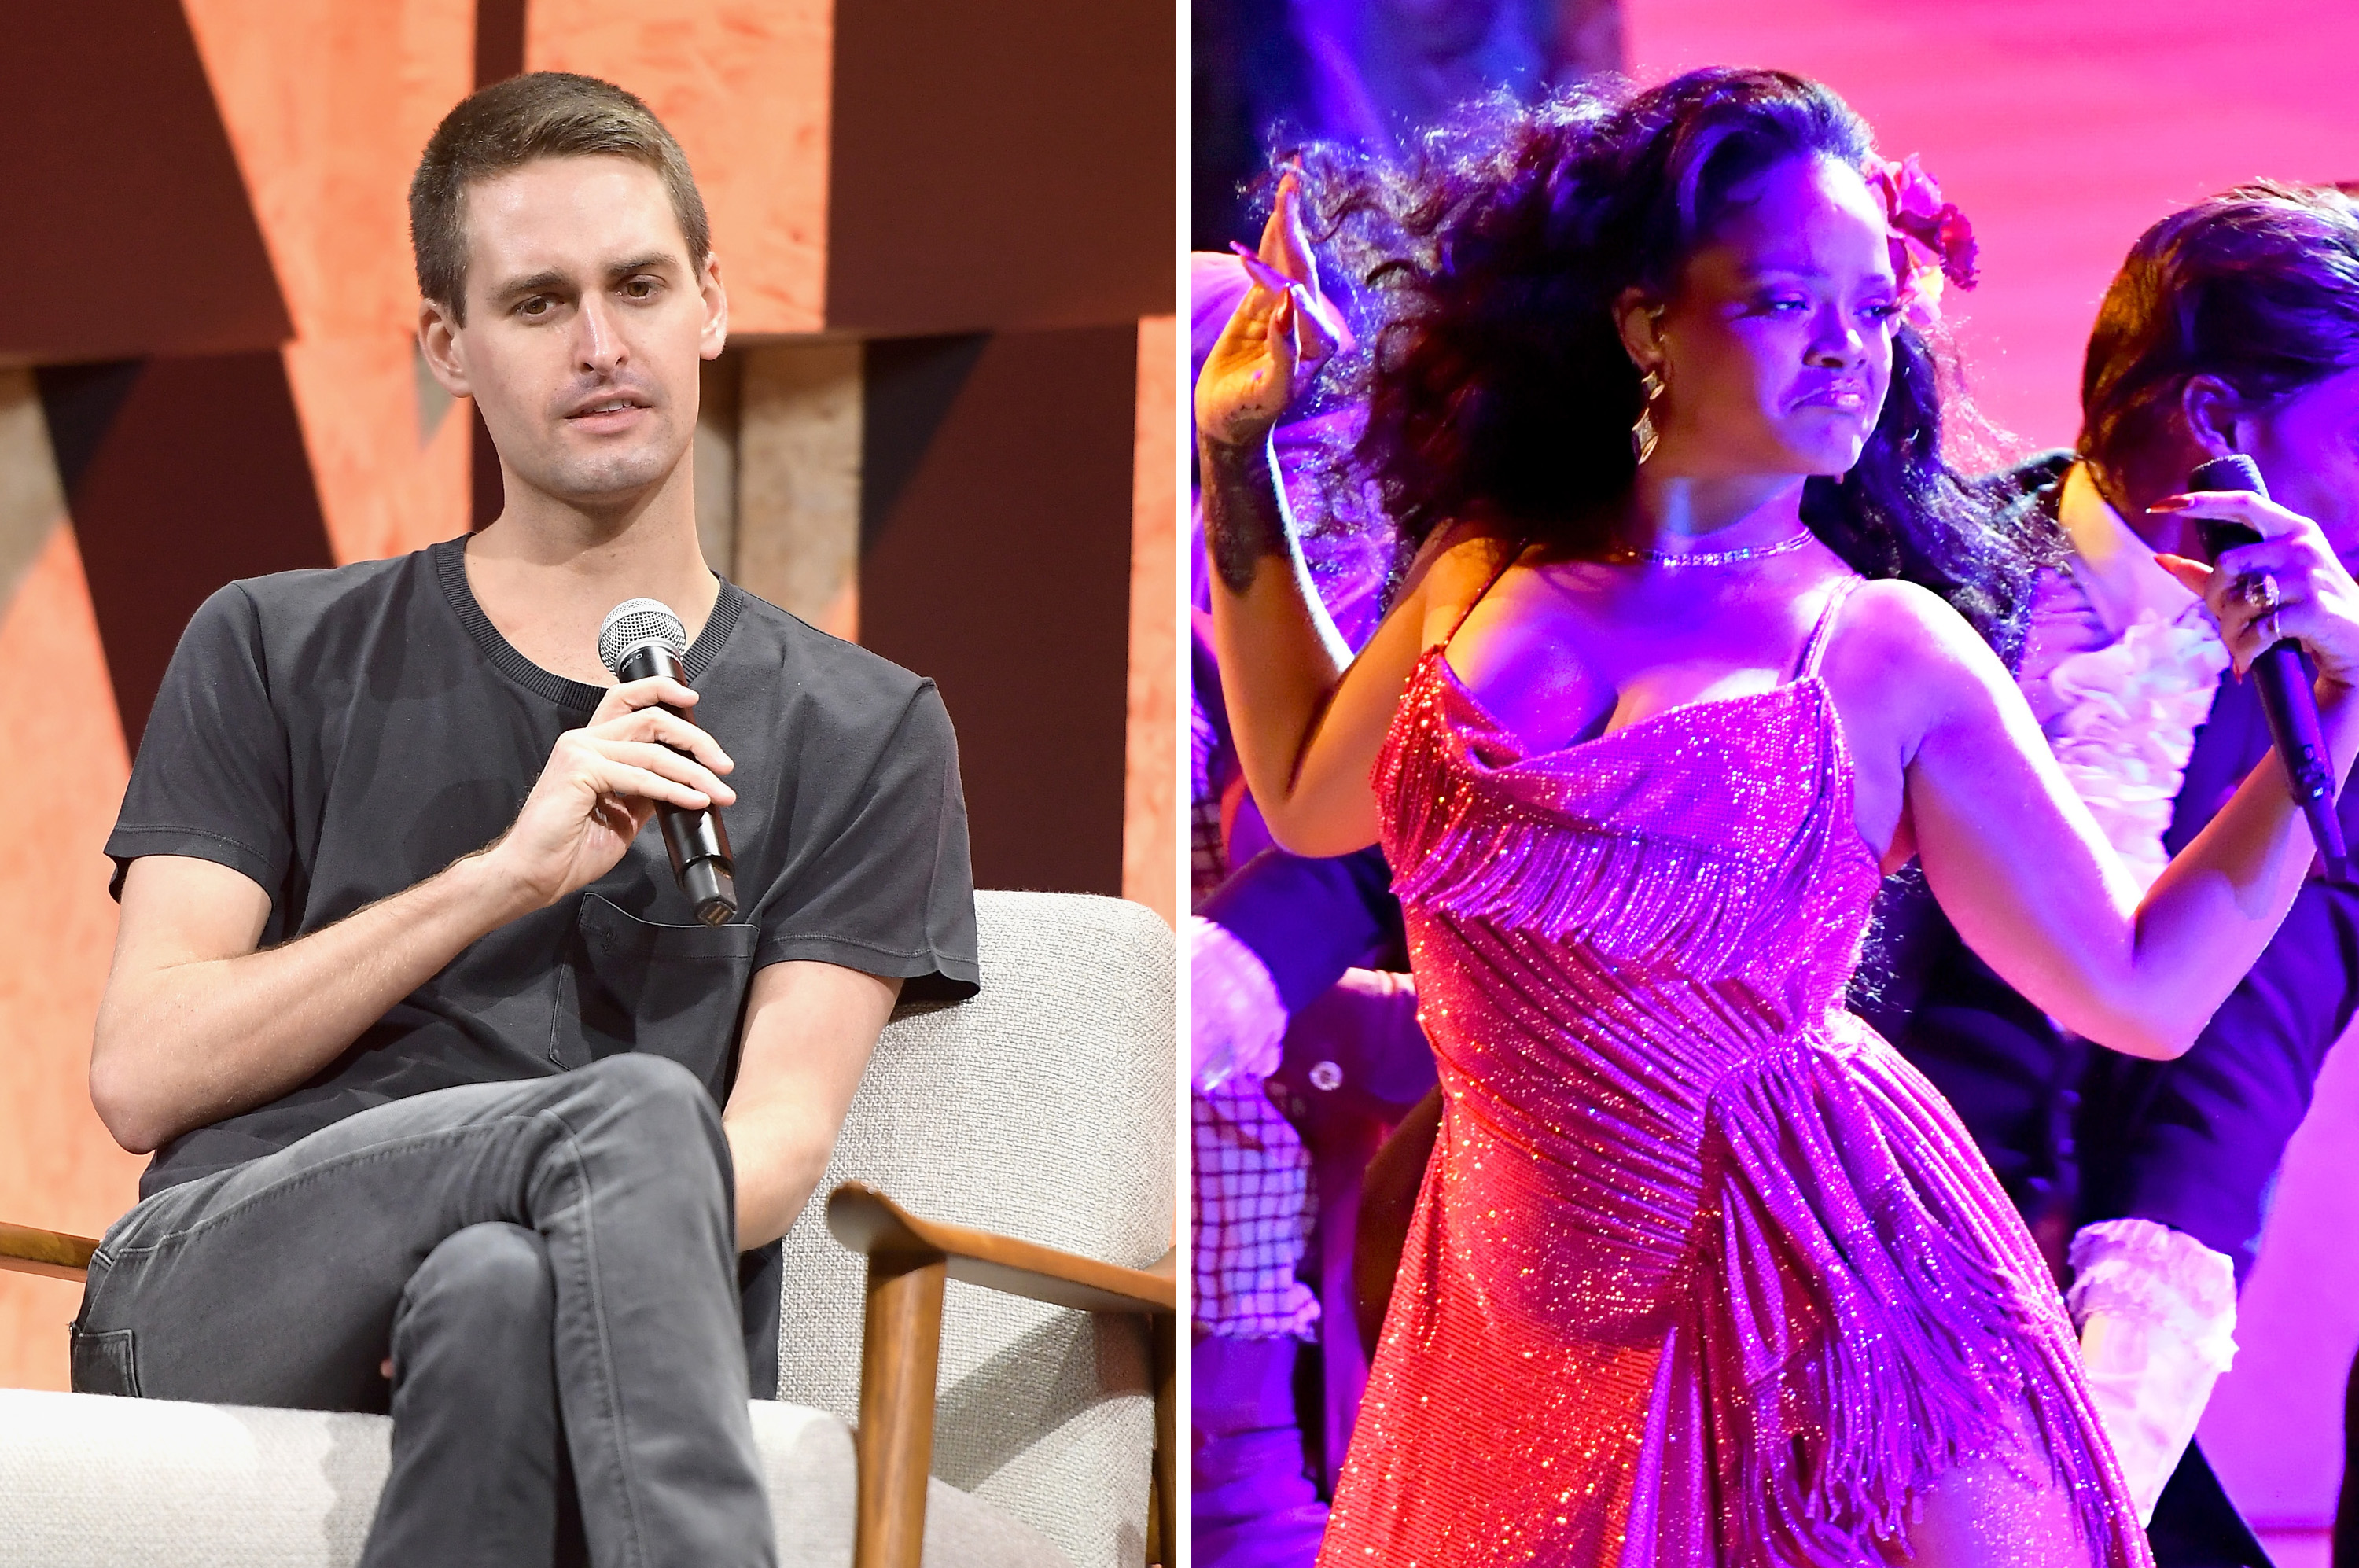 Here’s How Much Evan Spiegel Lost After Snapchat Ran a Terrible Rihanna Ad